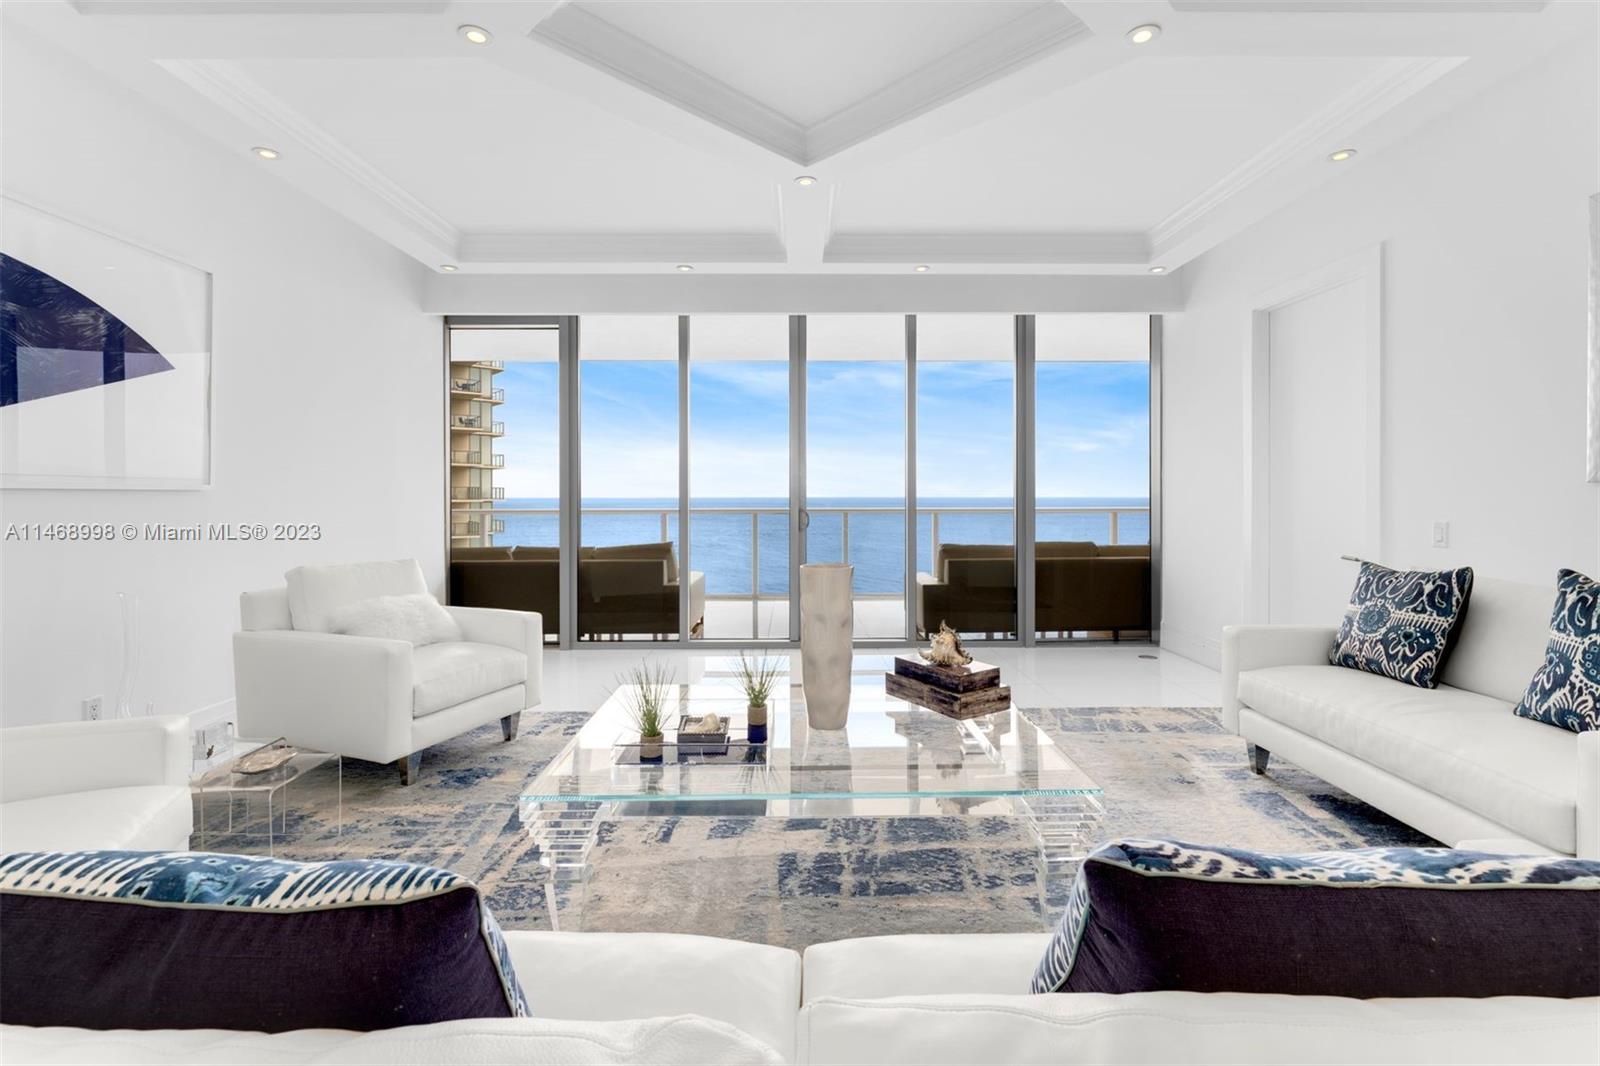 First time on the market! Incredible opportunity at the iconic St. Regis Bal Harbour. Gorgeous ocean front residence featuring flow-through floor plan with east and west terraces, 3 spacious bedrooms and  3 & 1/2 bathrooms, stunning direct ocean views plus breathtaking sunset views of intracoastal/city skyline. Upgrades and high end finishes throughout with top-of-the-line appliances including open kitchen area, eat-in counter, dual wolf ovens, gas cooktop, Subzero refrigerator/ wine cooler and built-in Miele coffee machine. Enjoy exclusive 5 Stars 5 Diamonds resort amenities such as State of the art fitness center, Spa, Concierge & Butler team, Pool & Beach service , 24 hours in-room dining and much more. Best deal at St. Regis! Across from renowned Bal Harbour Shops.